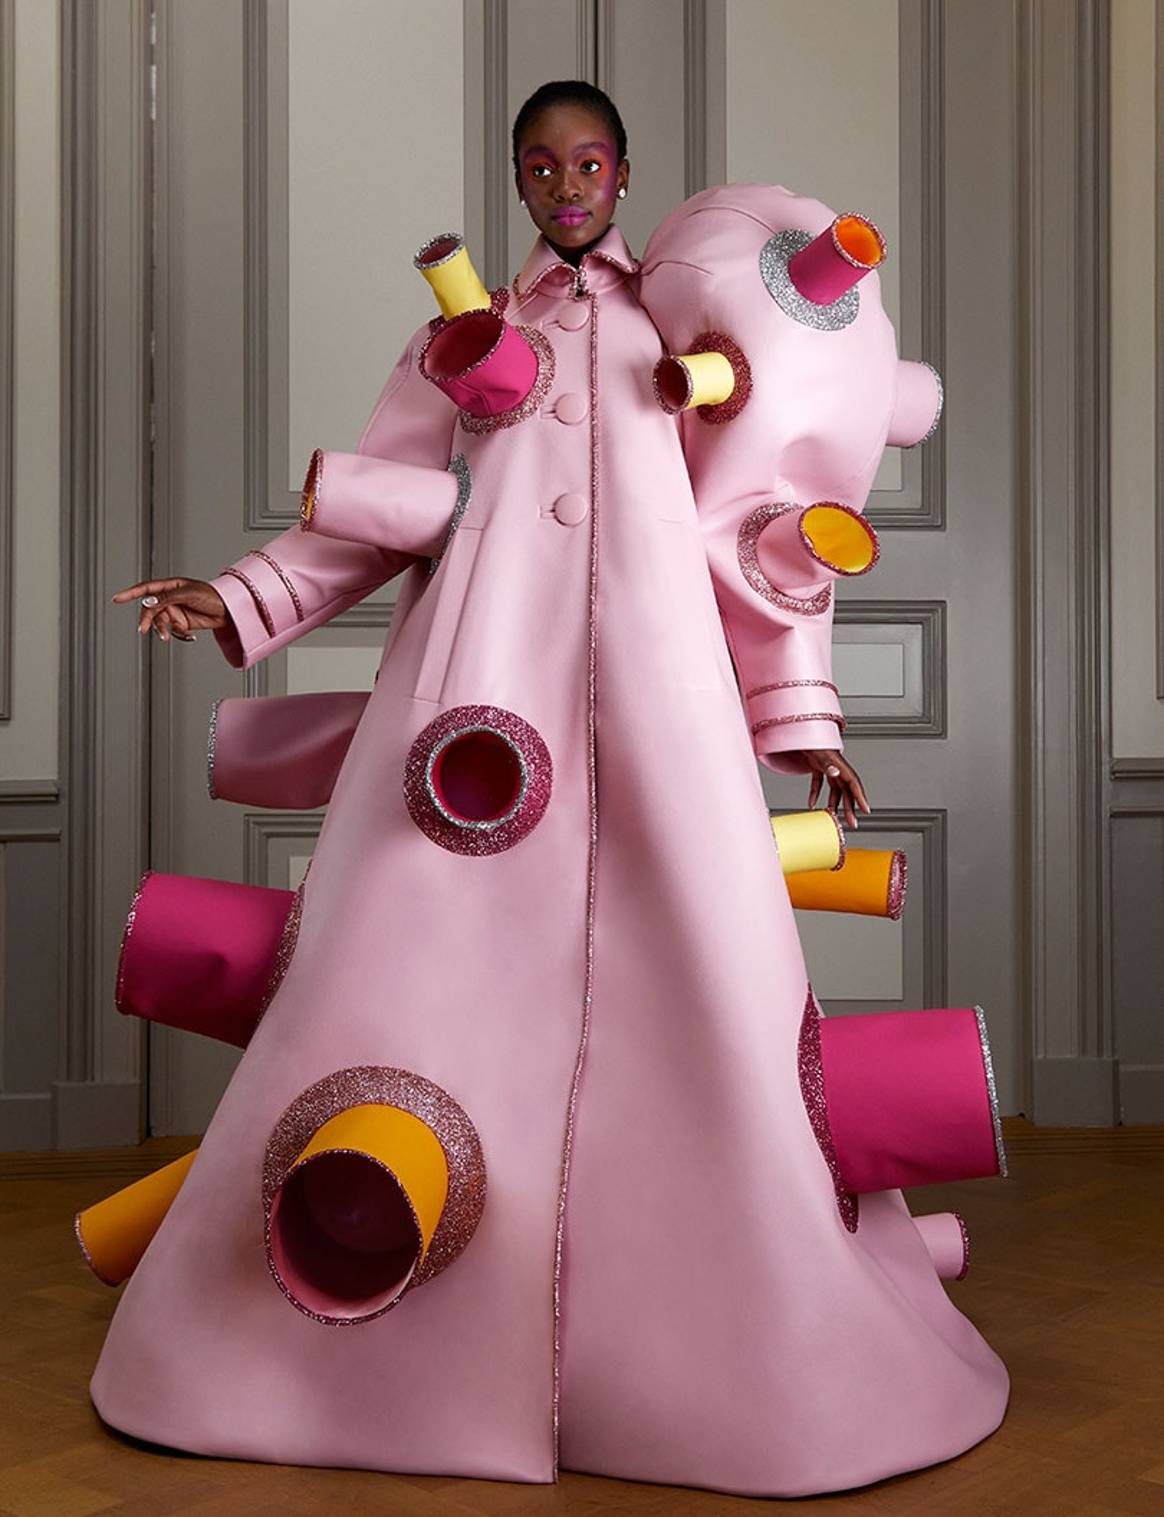 Viktor and Rolf embraces coronavirus for haute couture